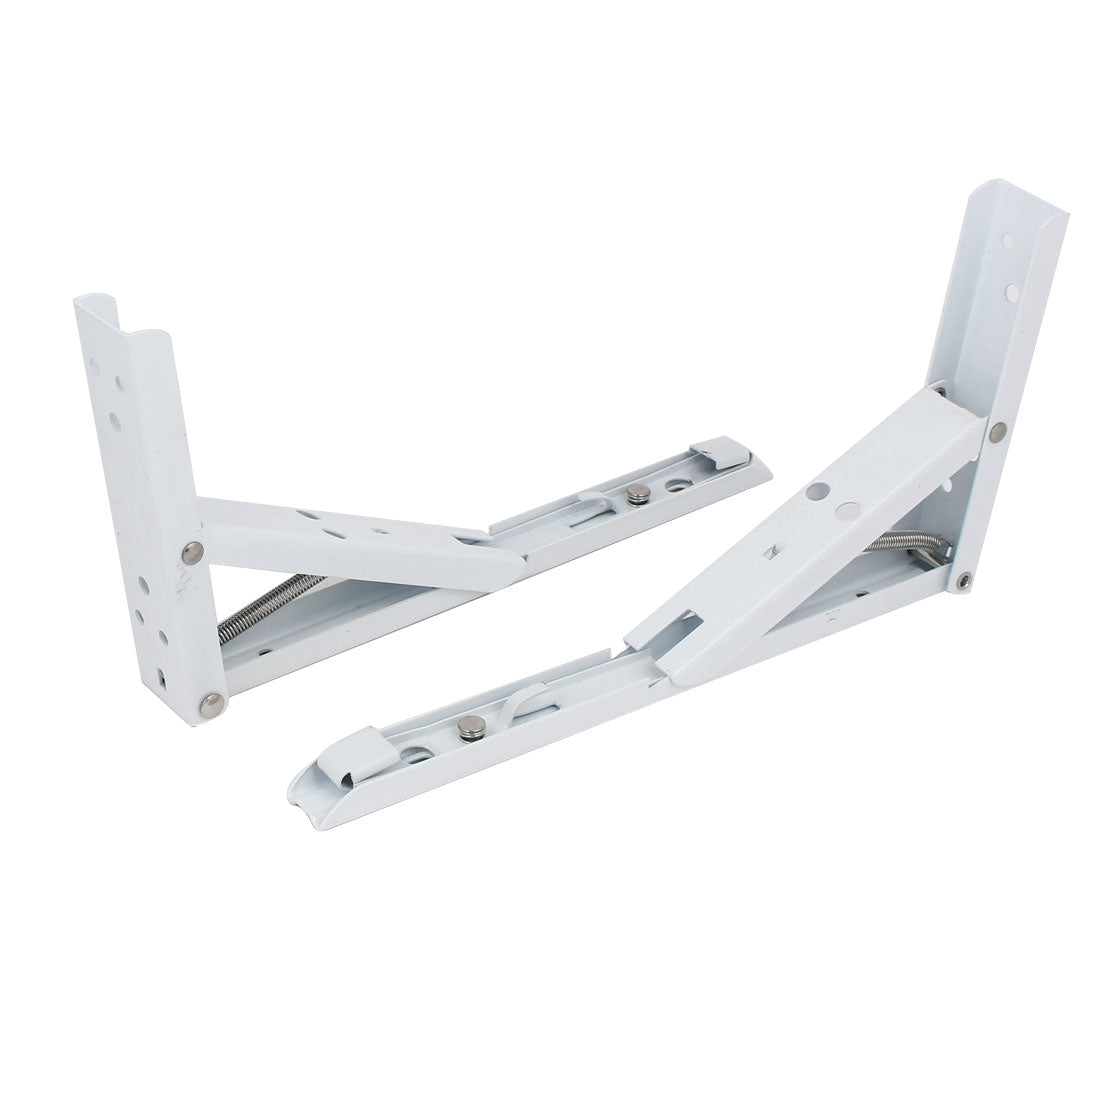 uxcell Uxcell 10-inch Long Metal Spring Loaded Folding Shelf Bracket Support White 2pcs